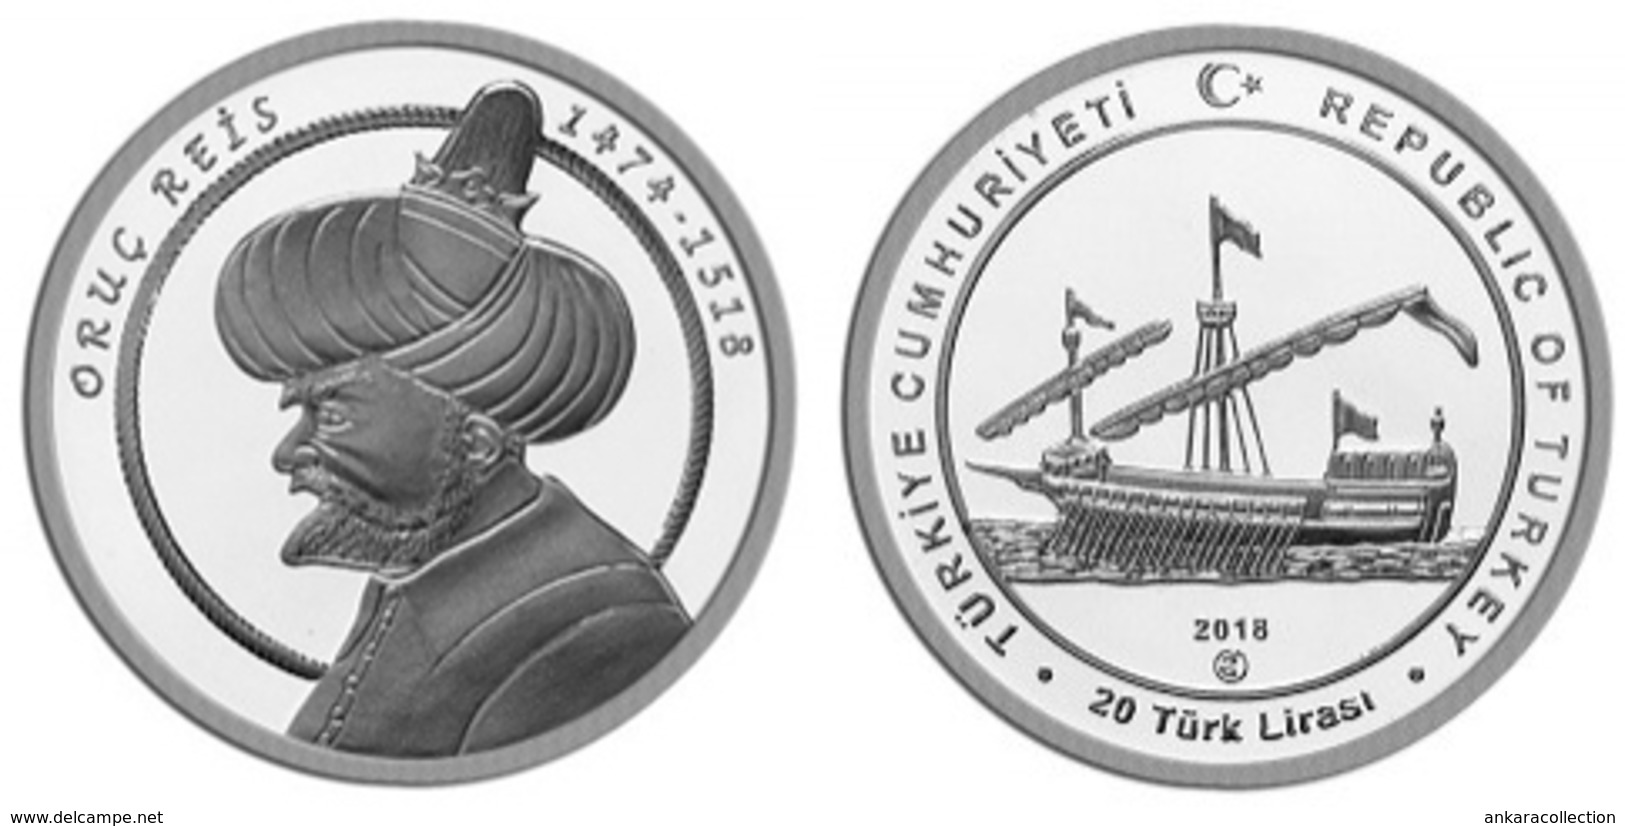 AC - ORUC REIS - OTTOMAN ADMIRAL 1474 - 1518 SHIPS AND DISCOVERER SERIES #9 COMMEMORATIVE SILVER COIN TURKEY 2018 PROOF - Turquie